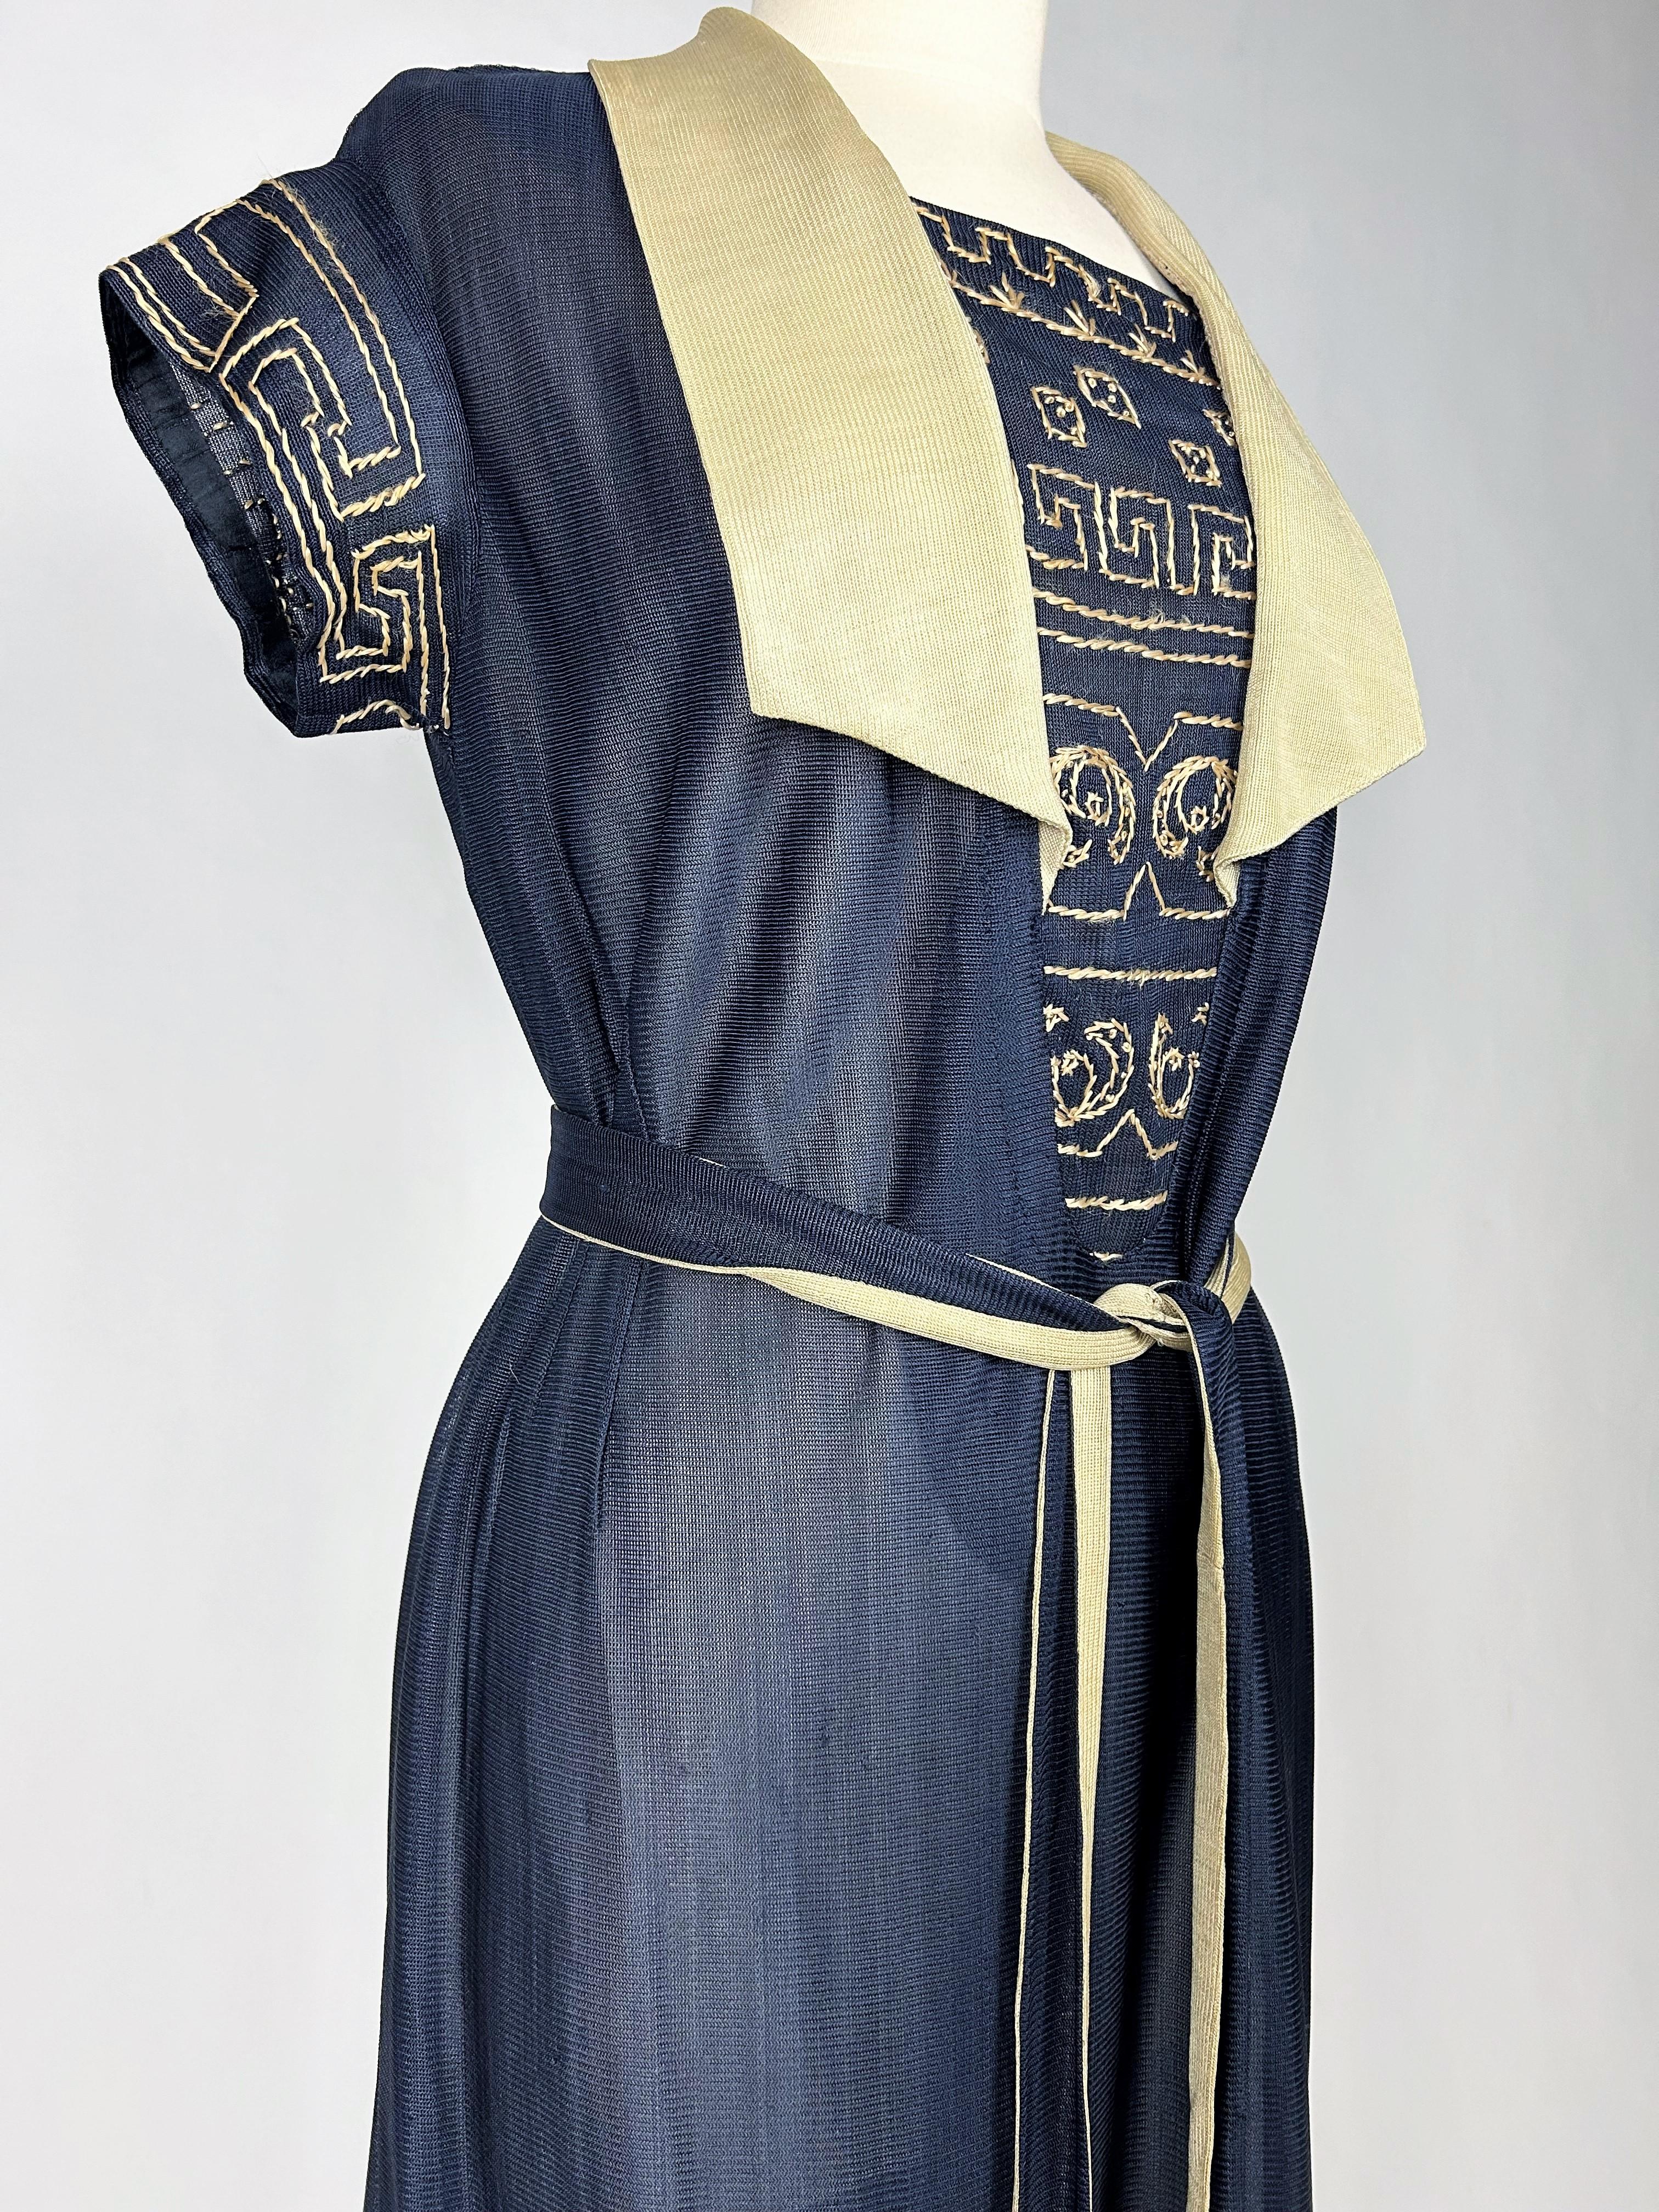 CC embroidered jersey knit silk Dress in the style of Coco Chanel France C. 1920 For Sale 4